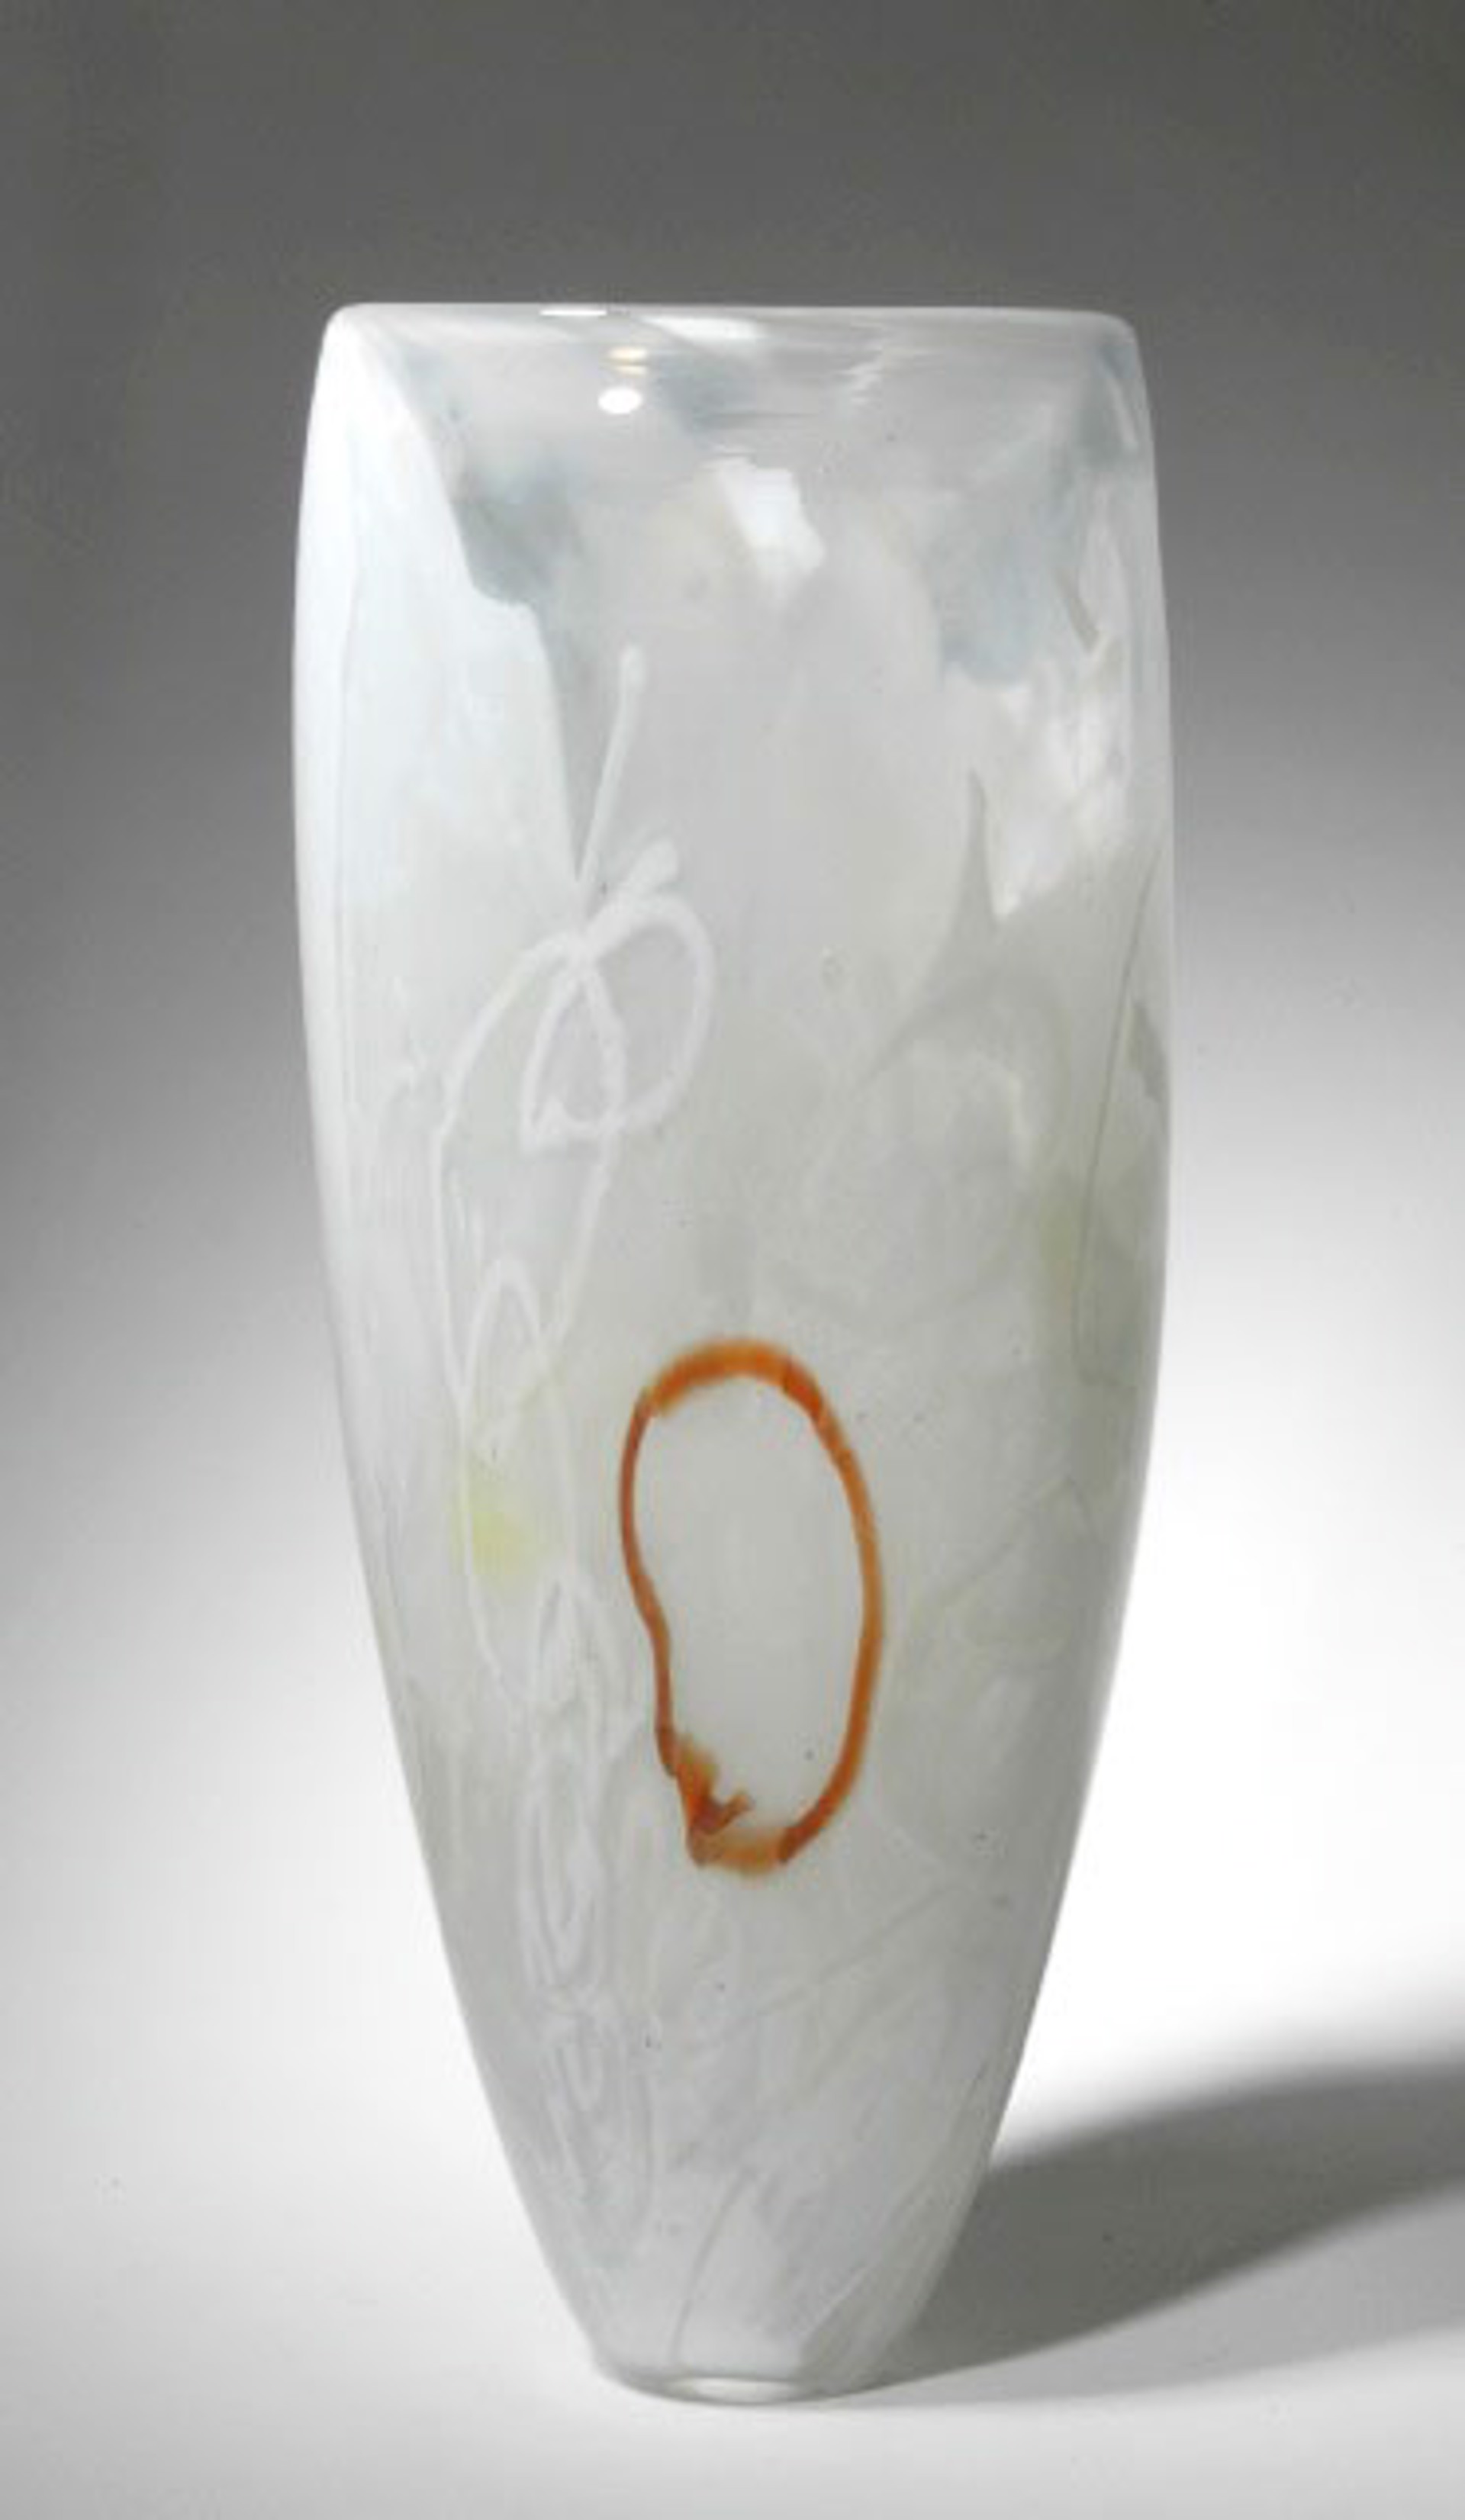 Shard Vase - Open Form White with Red O by Susan Rankin